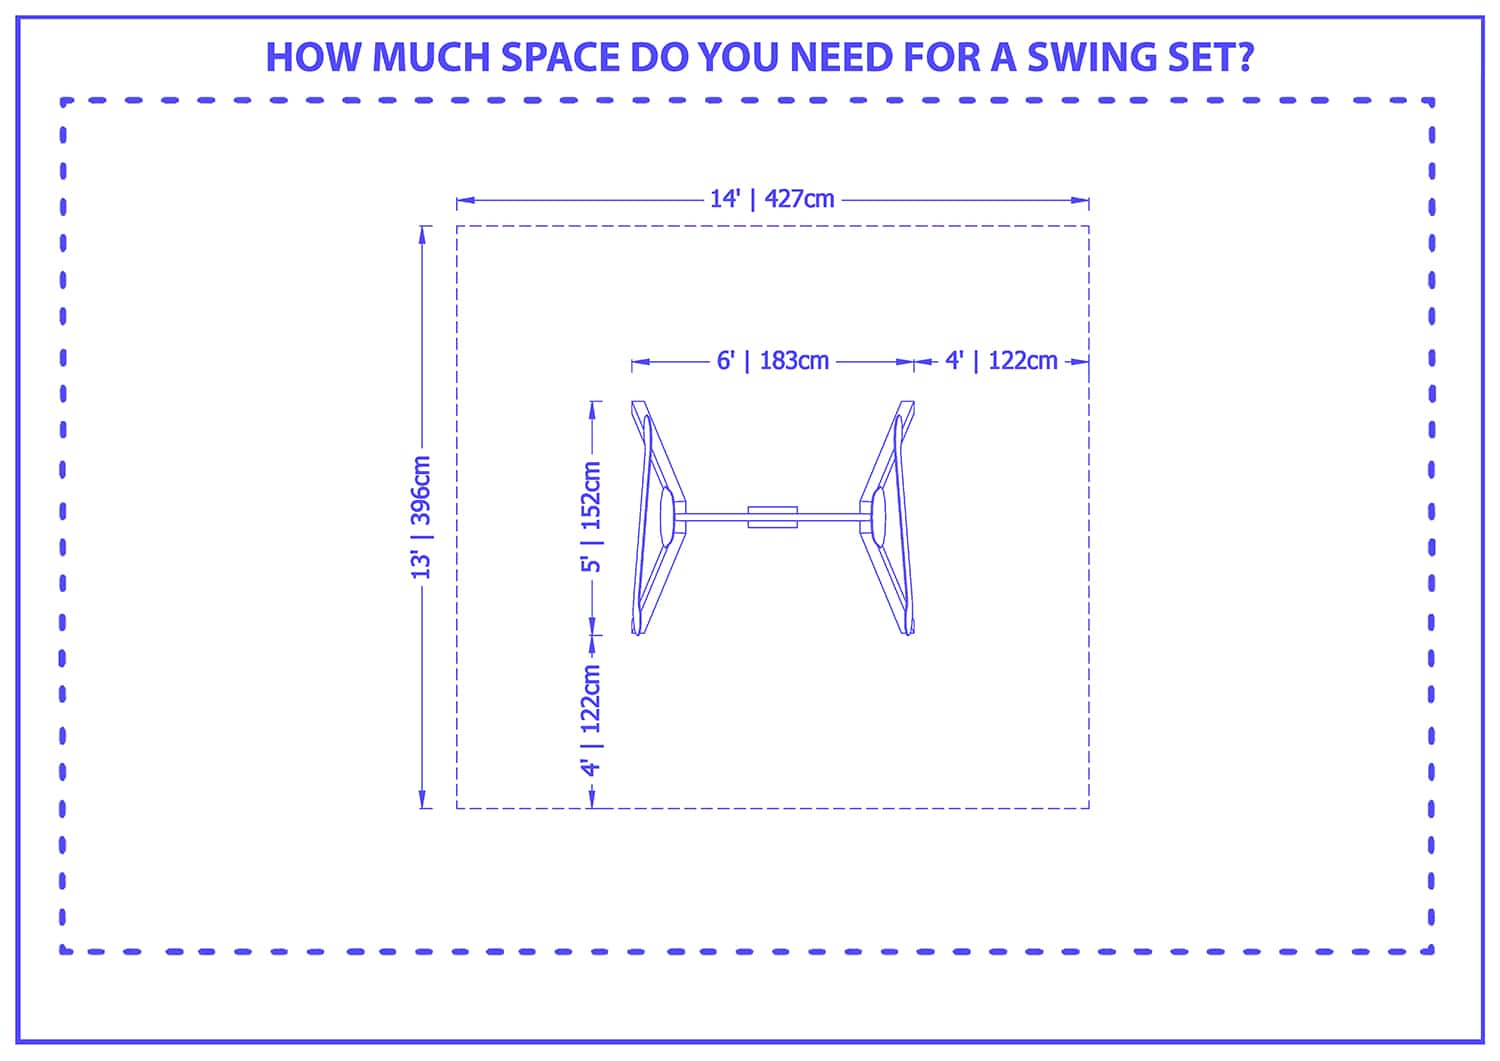 How much space do you need for a swing set?